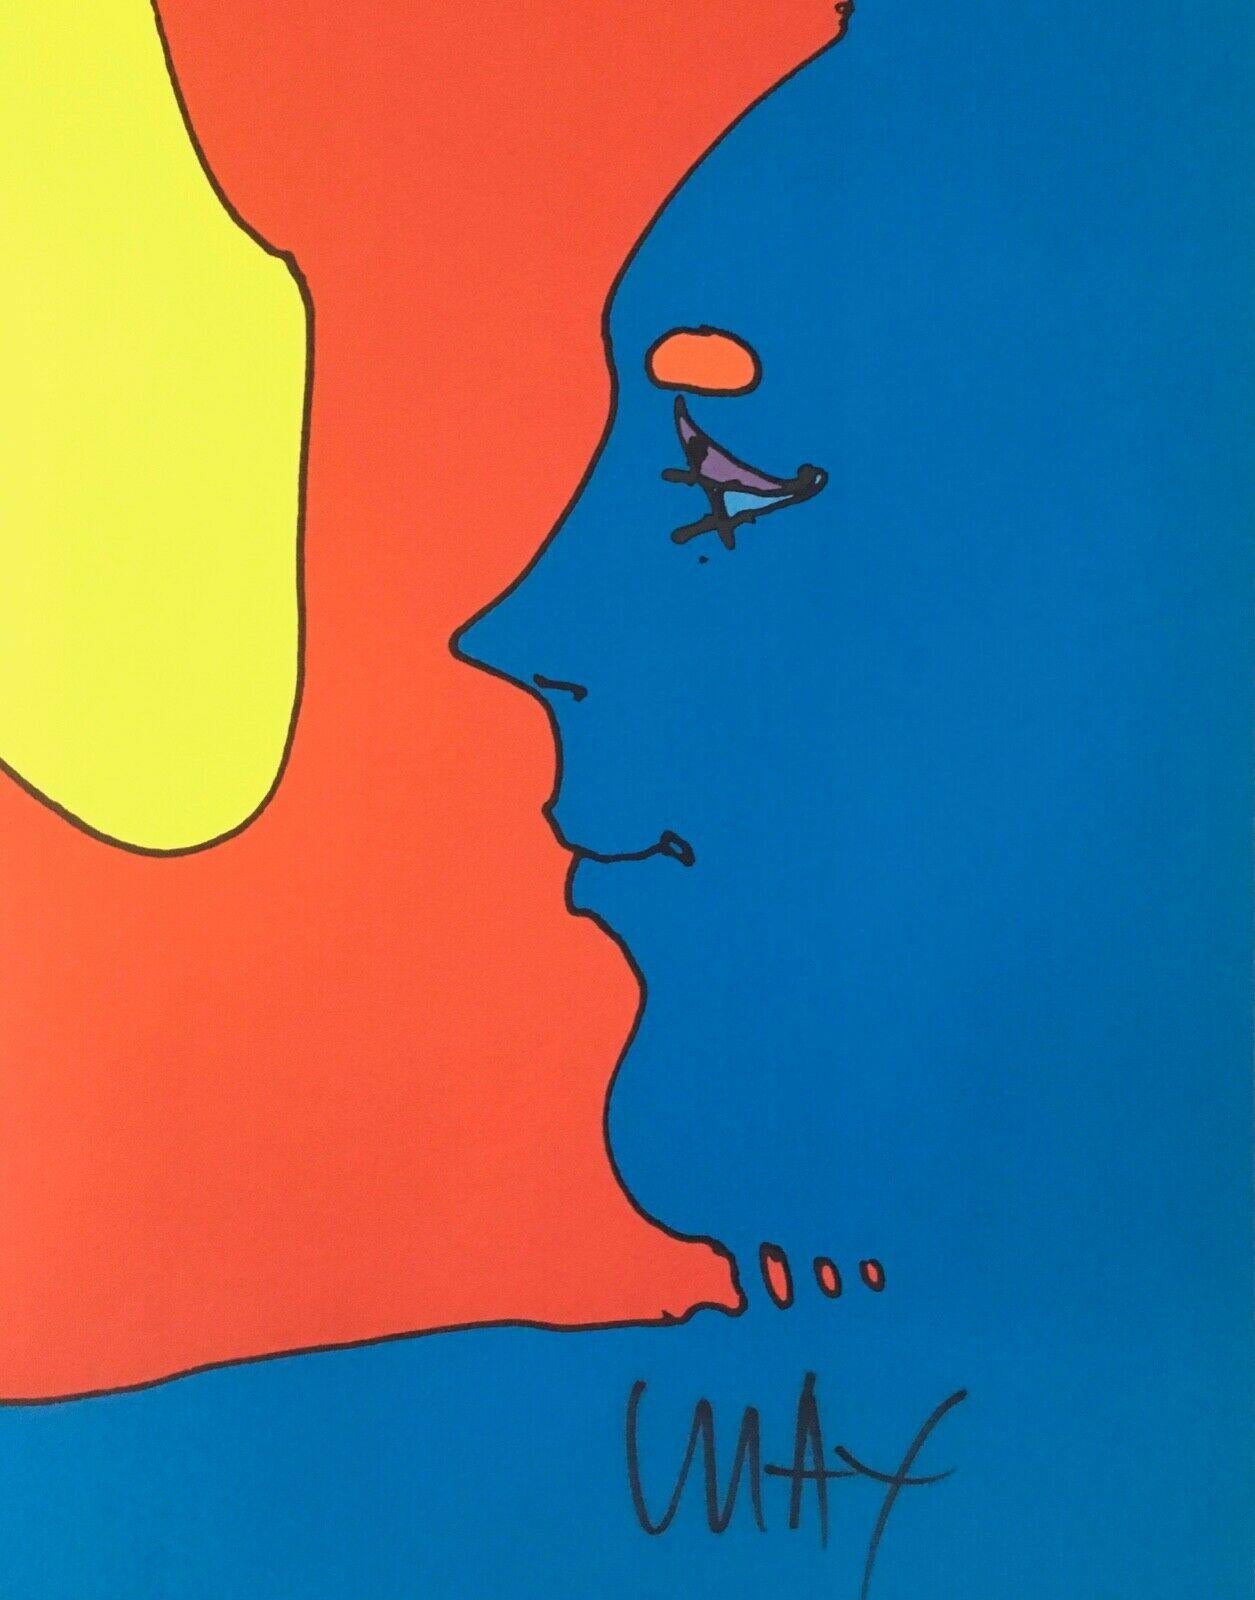 R.J. Grunts, Prince of Blue, Signed Original 1969 Vintage Litho Psychedelic  - Print by Peter Max